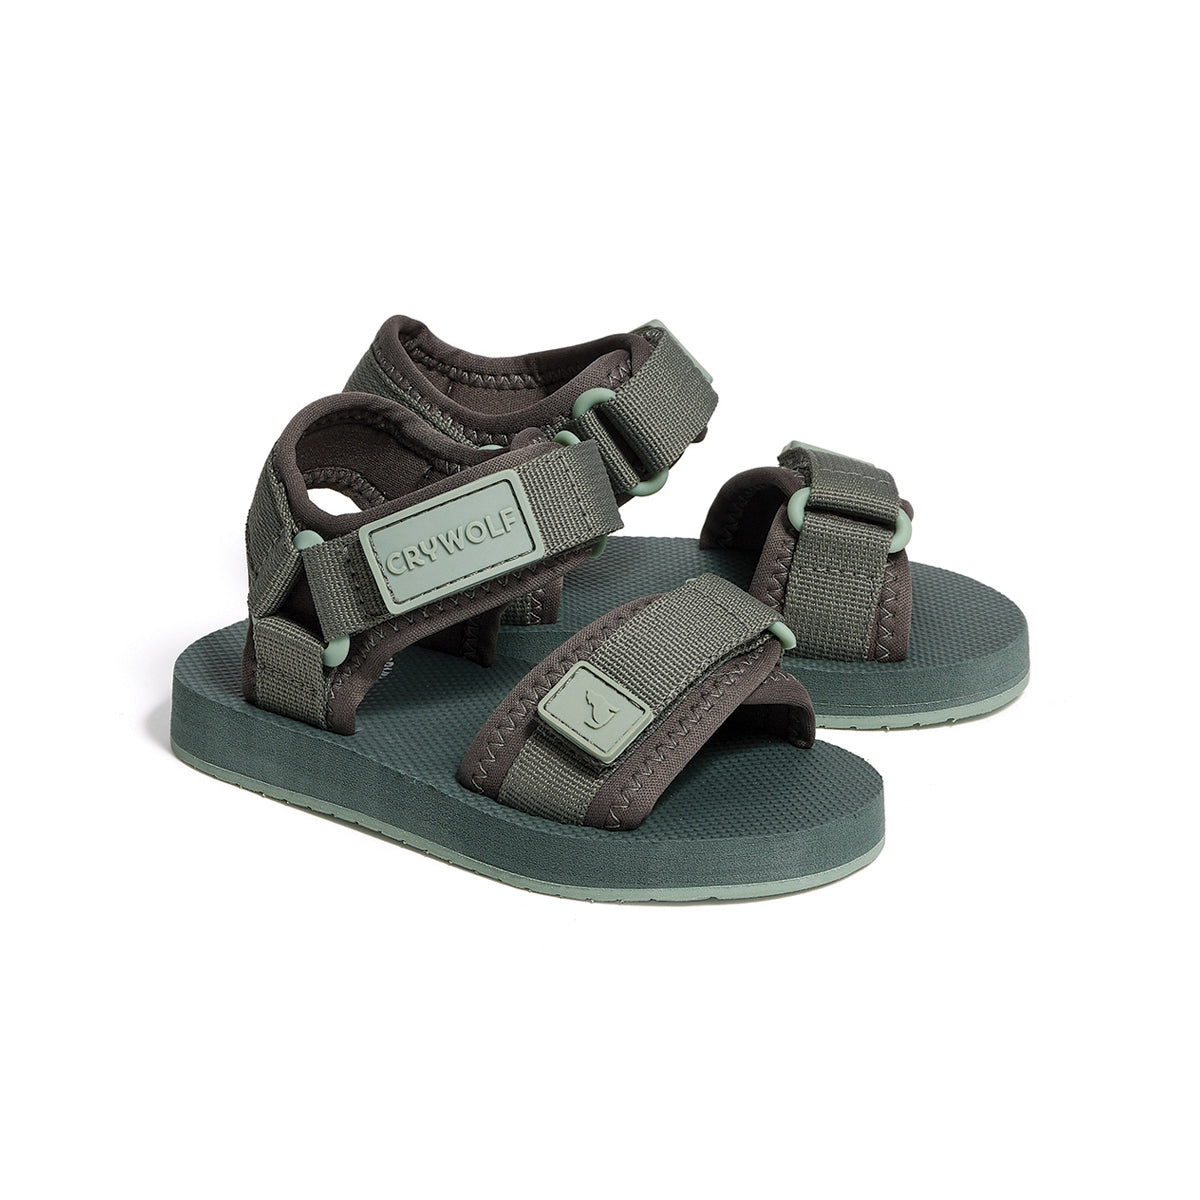 Crywolf Kids Beach Sandal | Adjustable Straps, Soft, Sole | Durable & Sustainable Materials | Grey/Green – CRYWOLF (NZ)